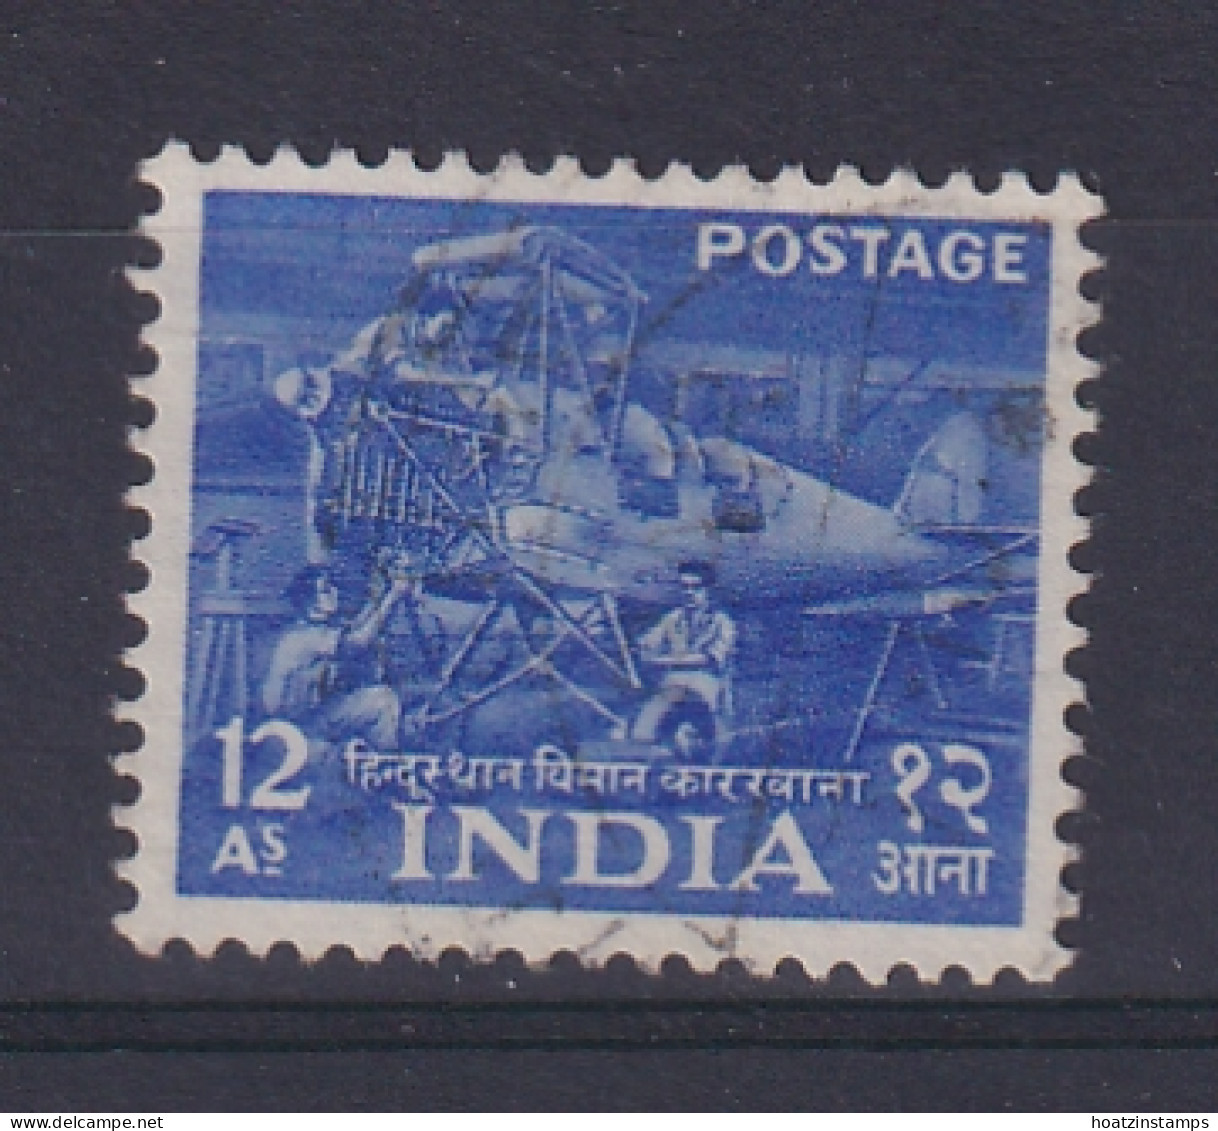 India: 1955   Five Year Plan    SG364    12a   Used - Used Stamps